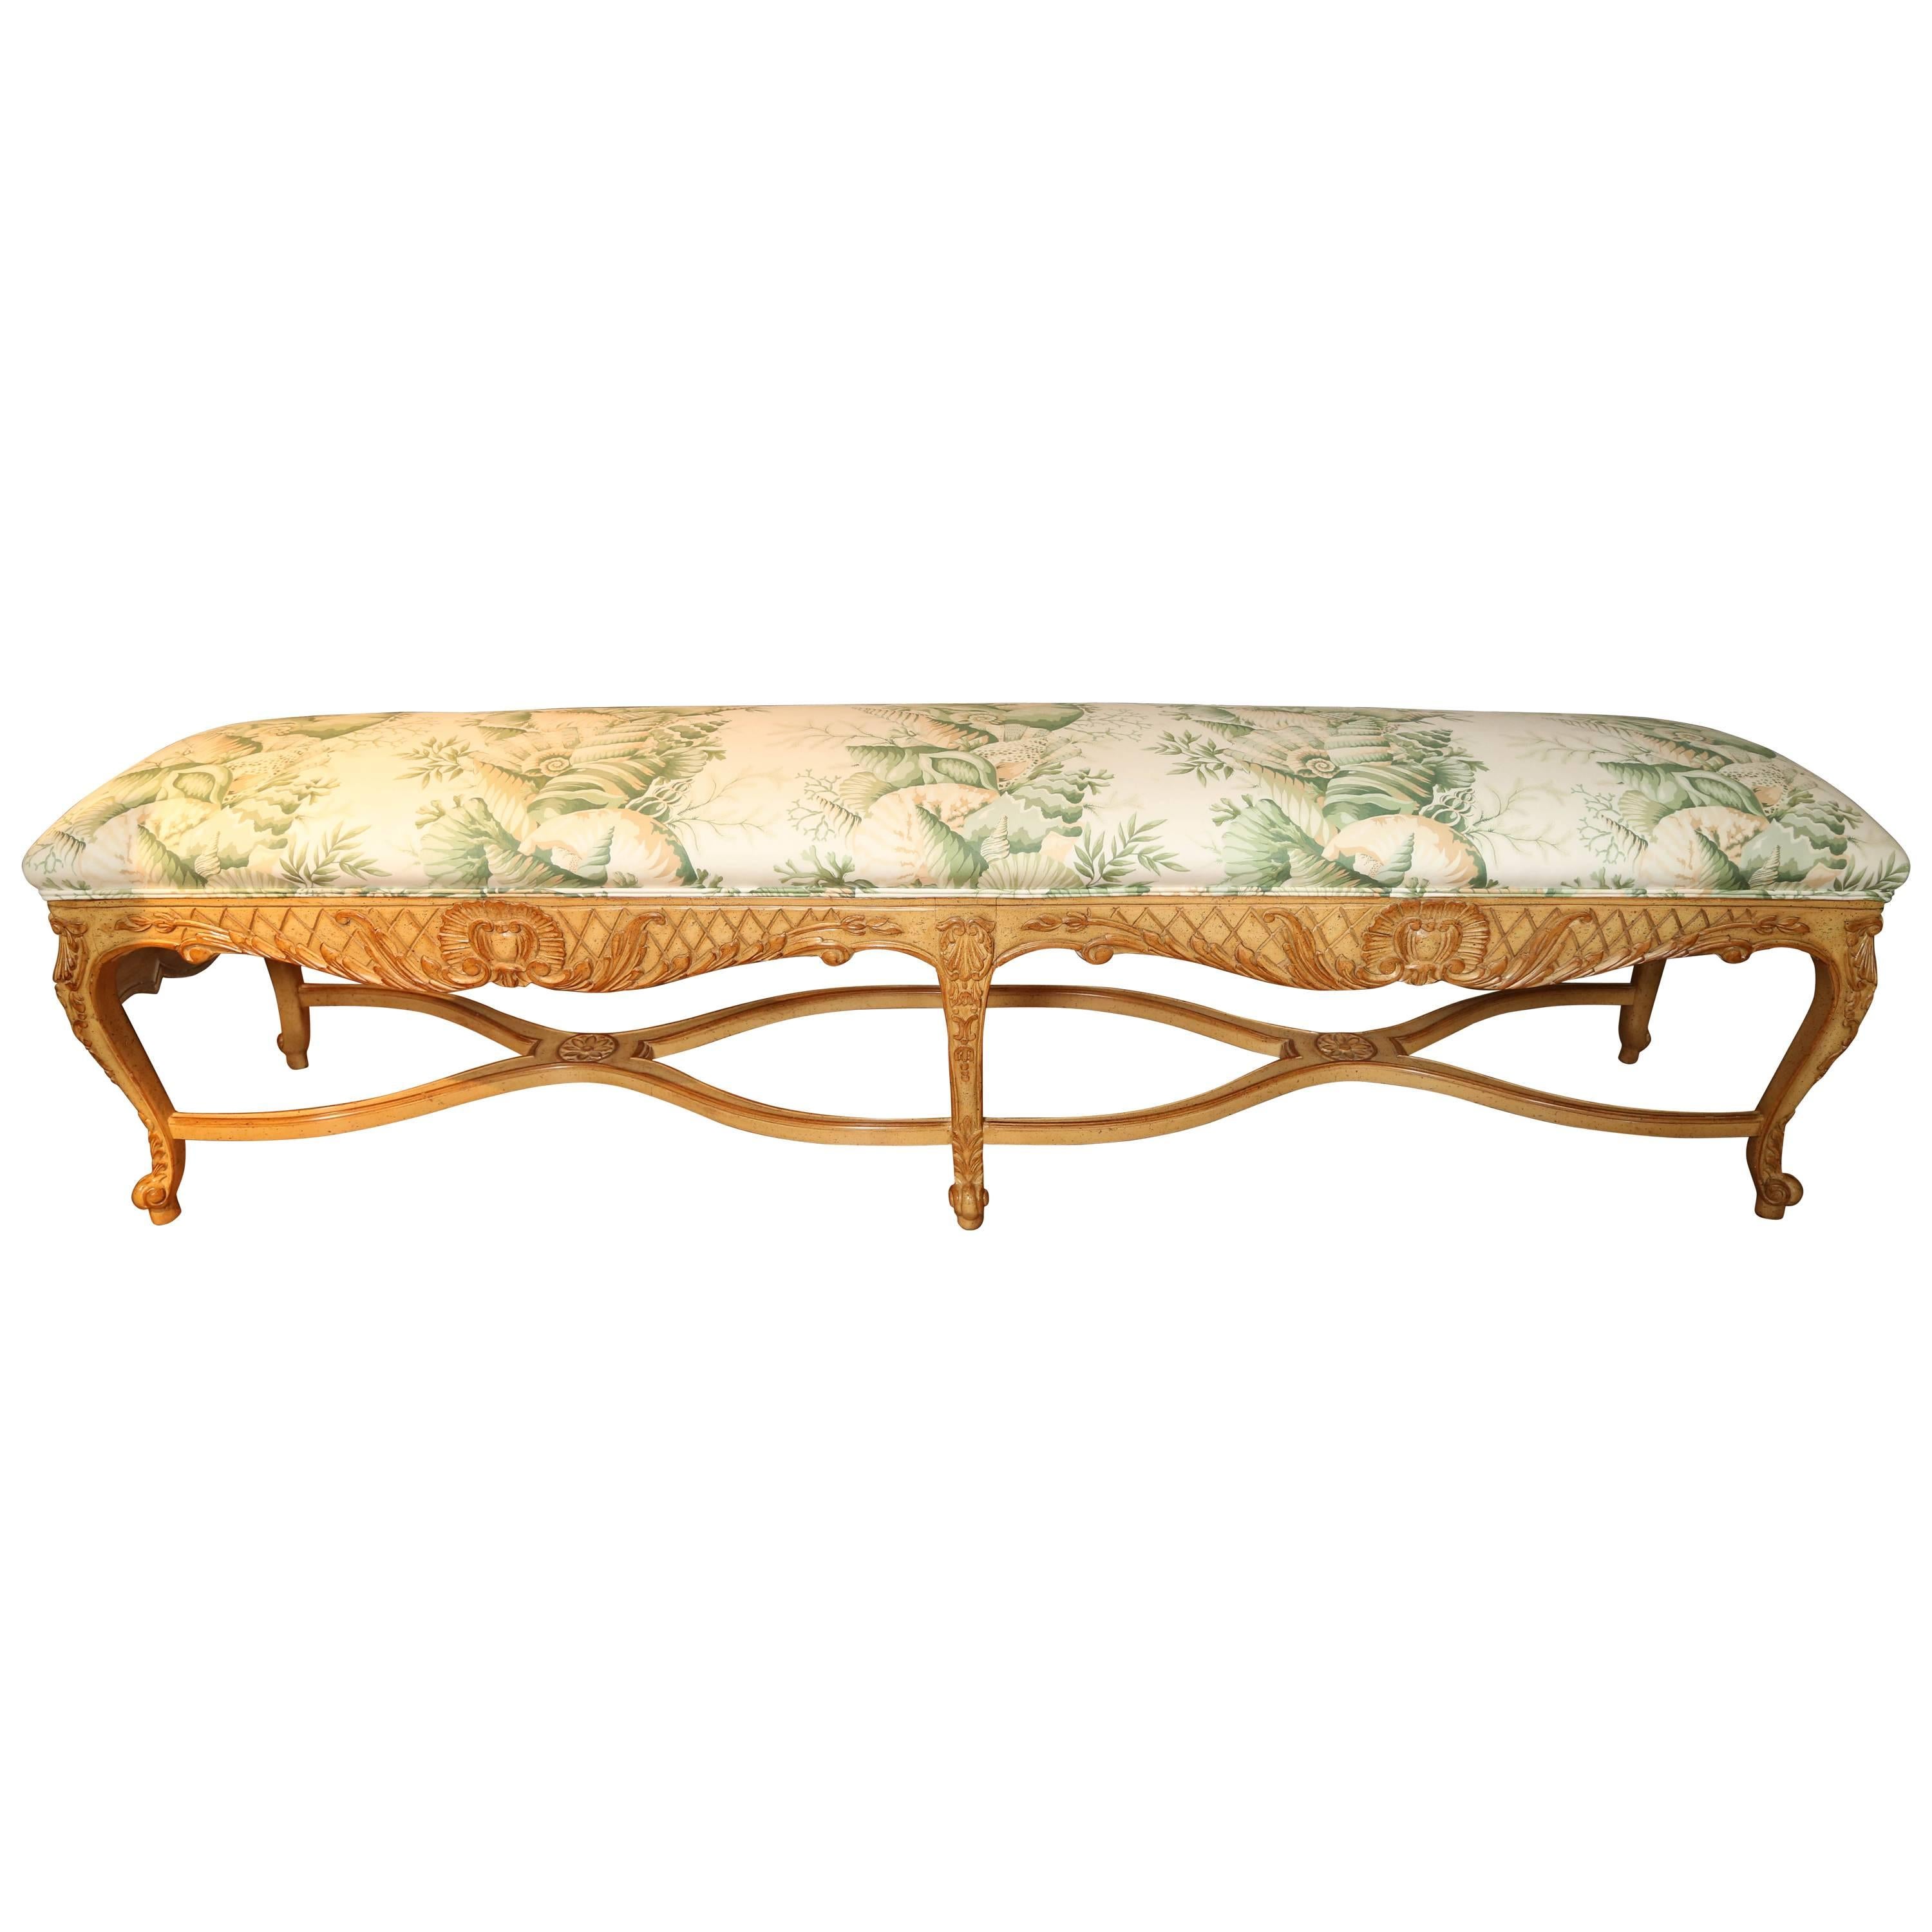 Country French Bench by Auffray